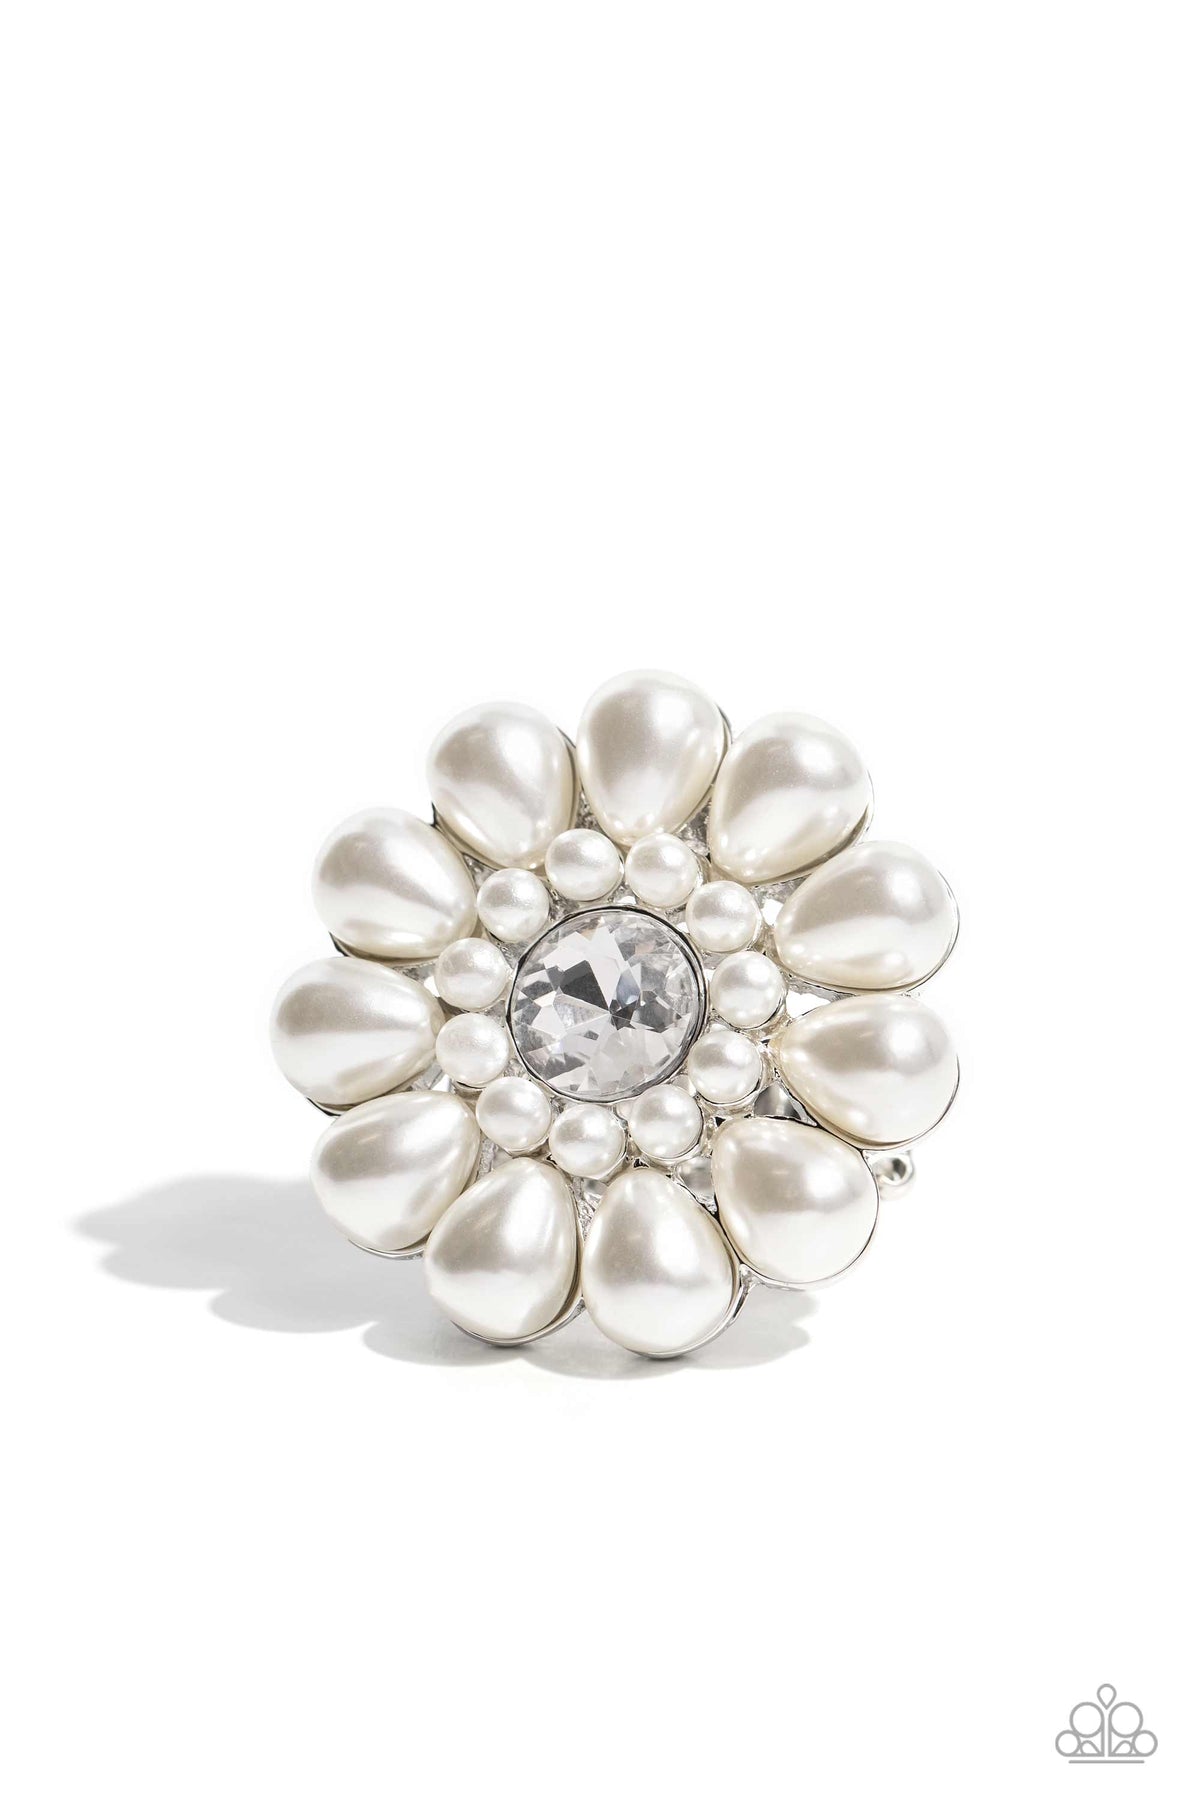 Pearl Talk White Pearl Ring - Paparazzi Accessories- lightbox - CarasShop.com - $5 Jewelry by Cara Jewels